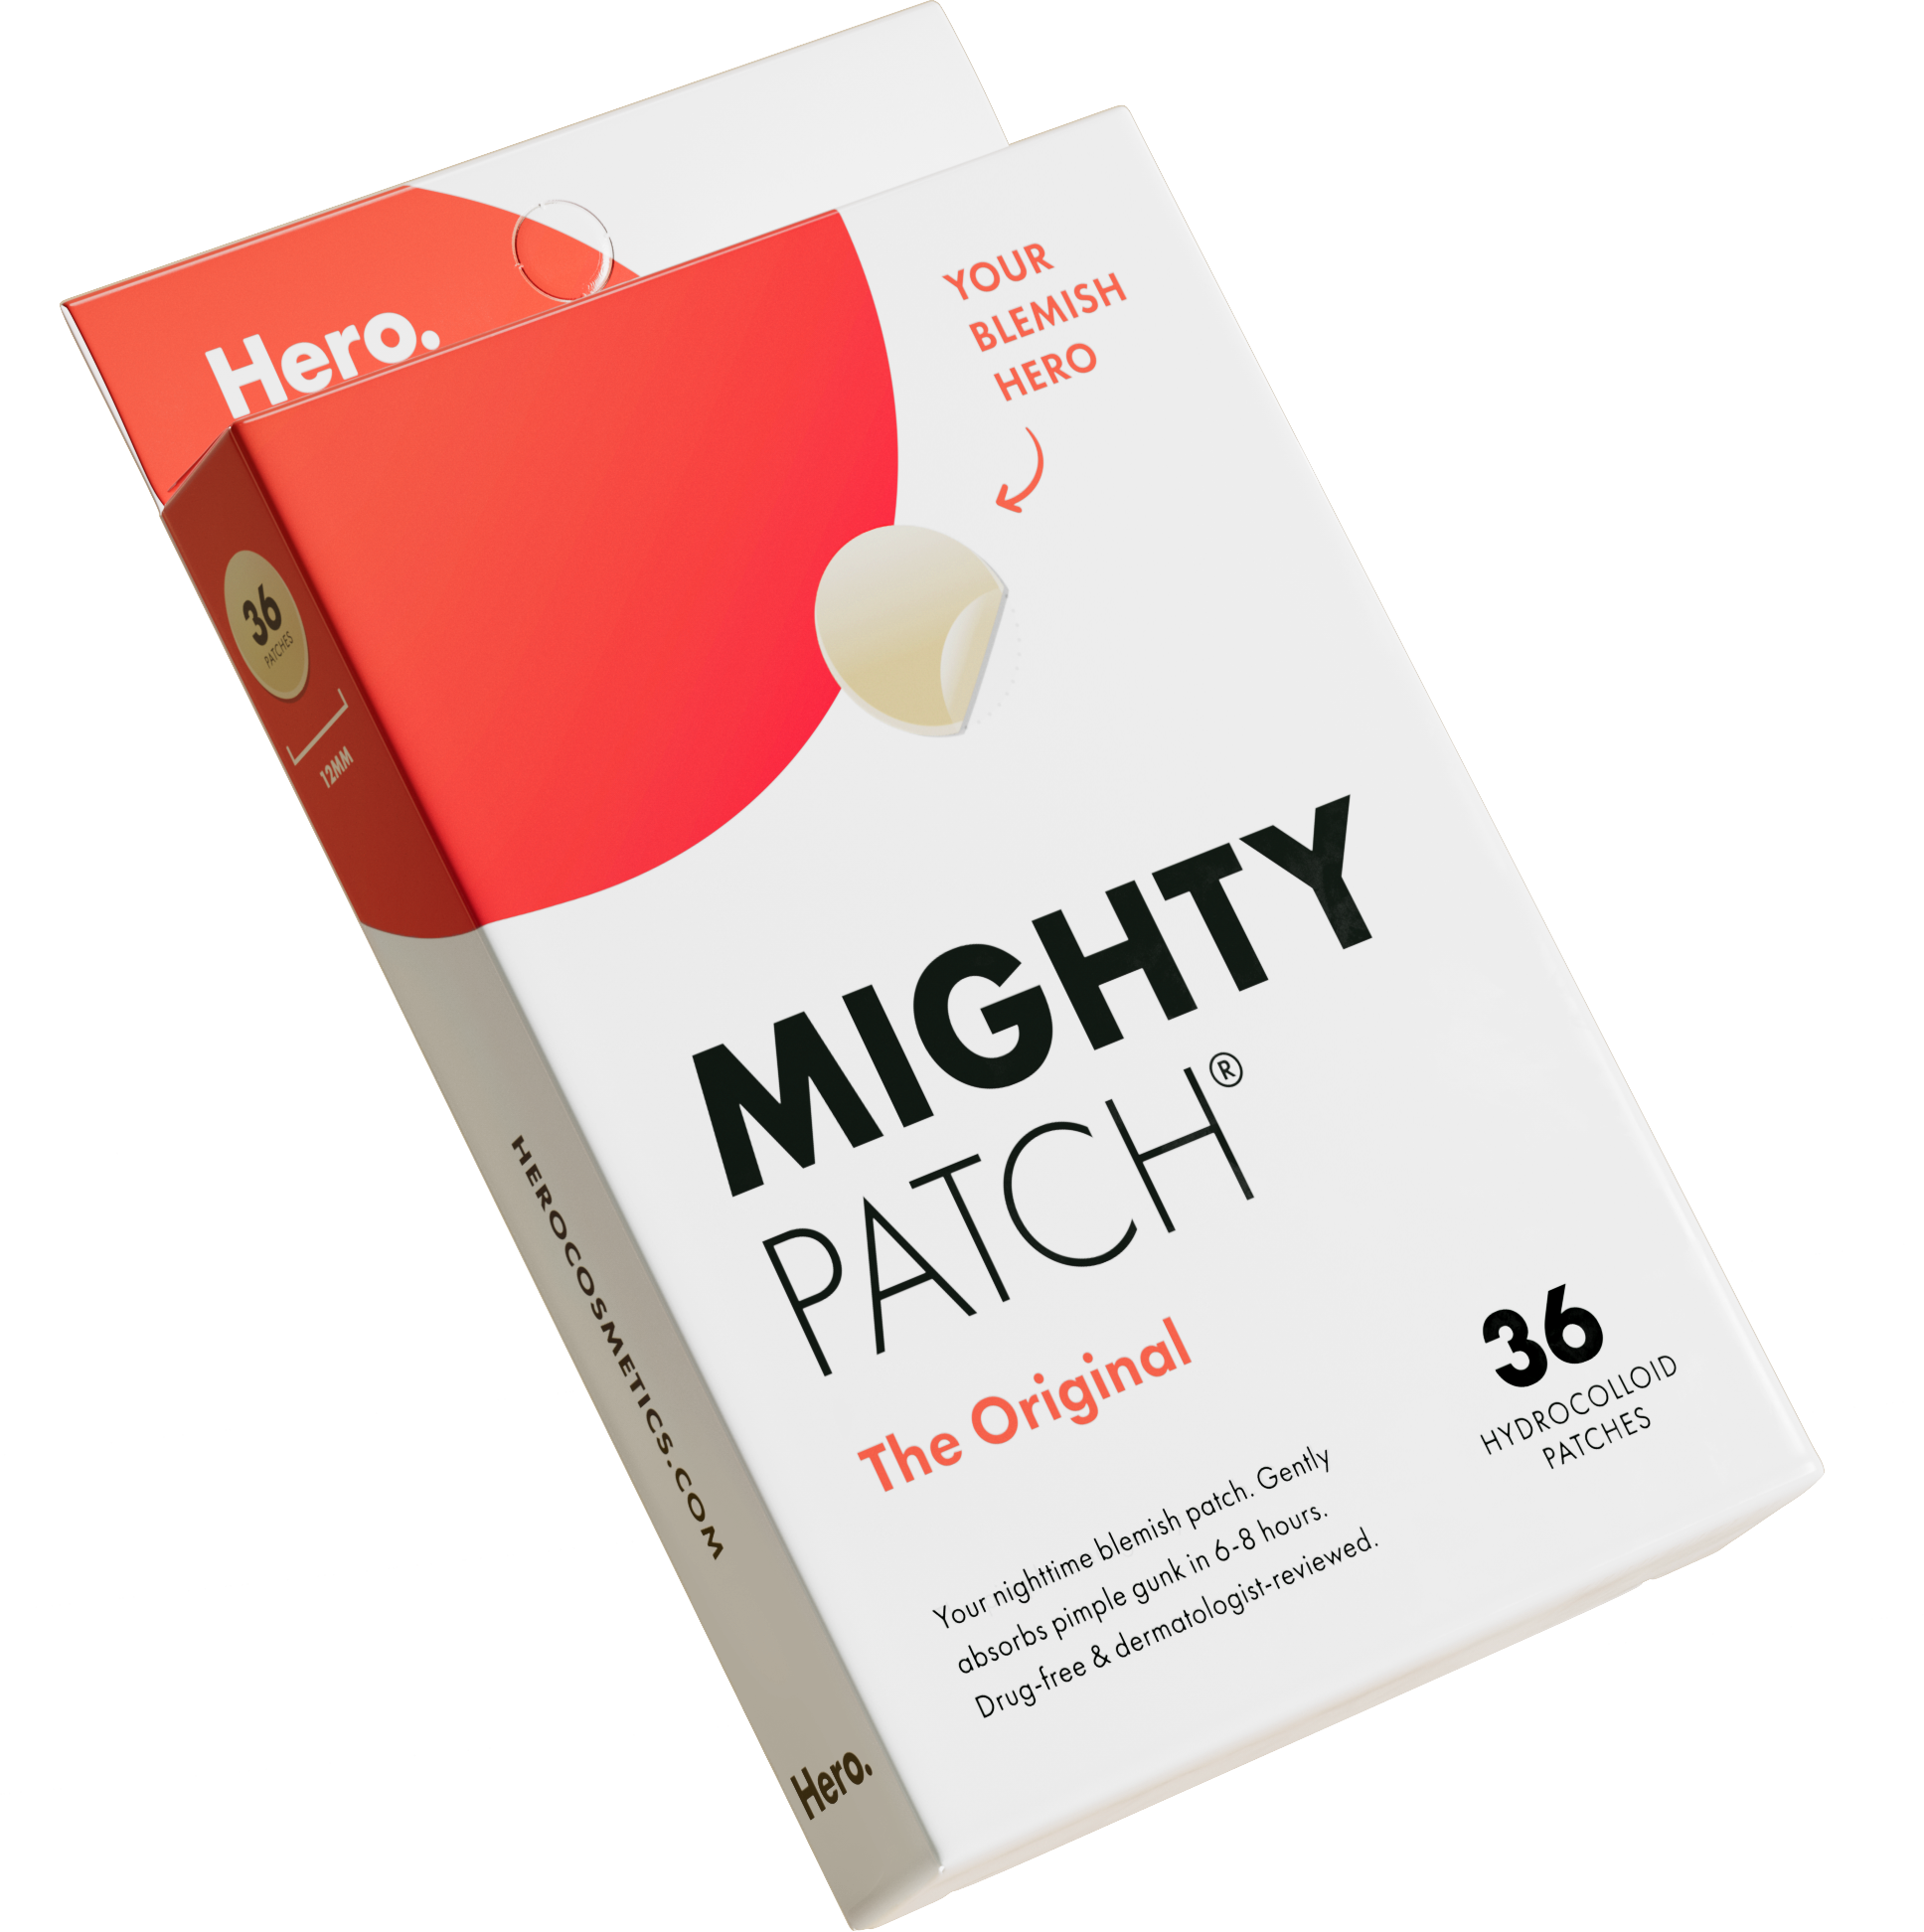 An open box of Mighty Patch Original.